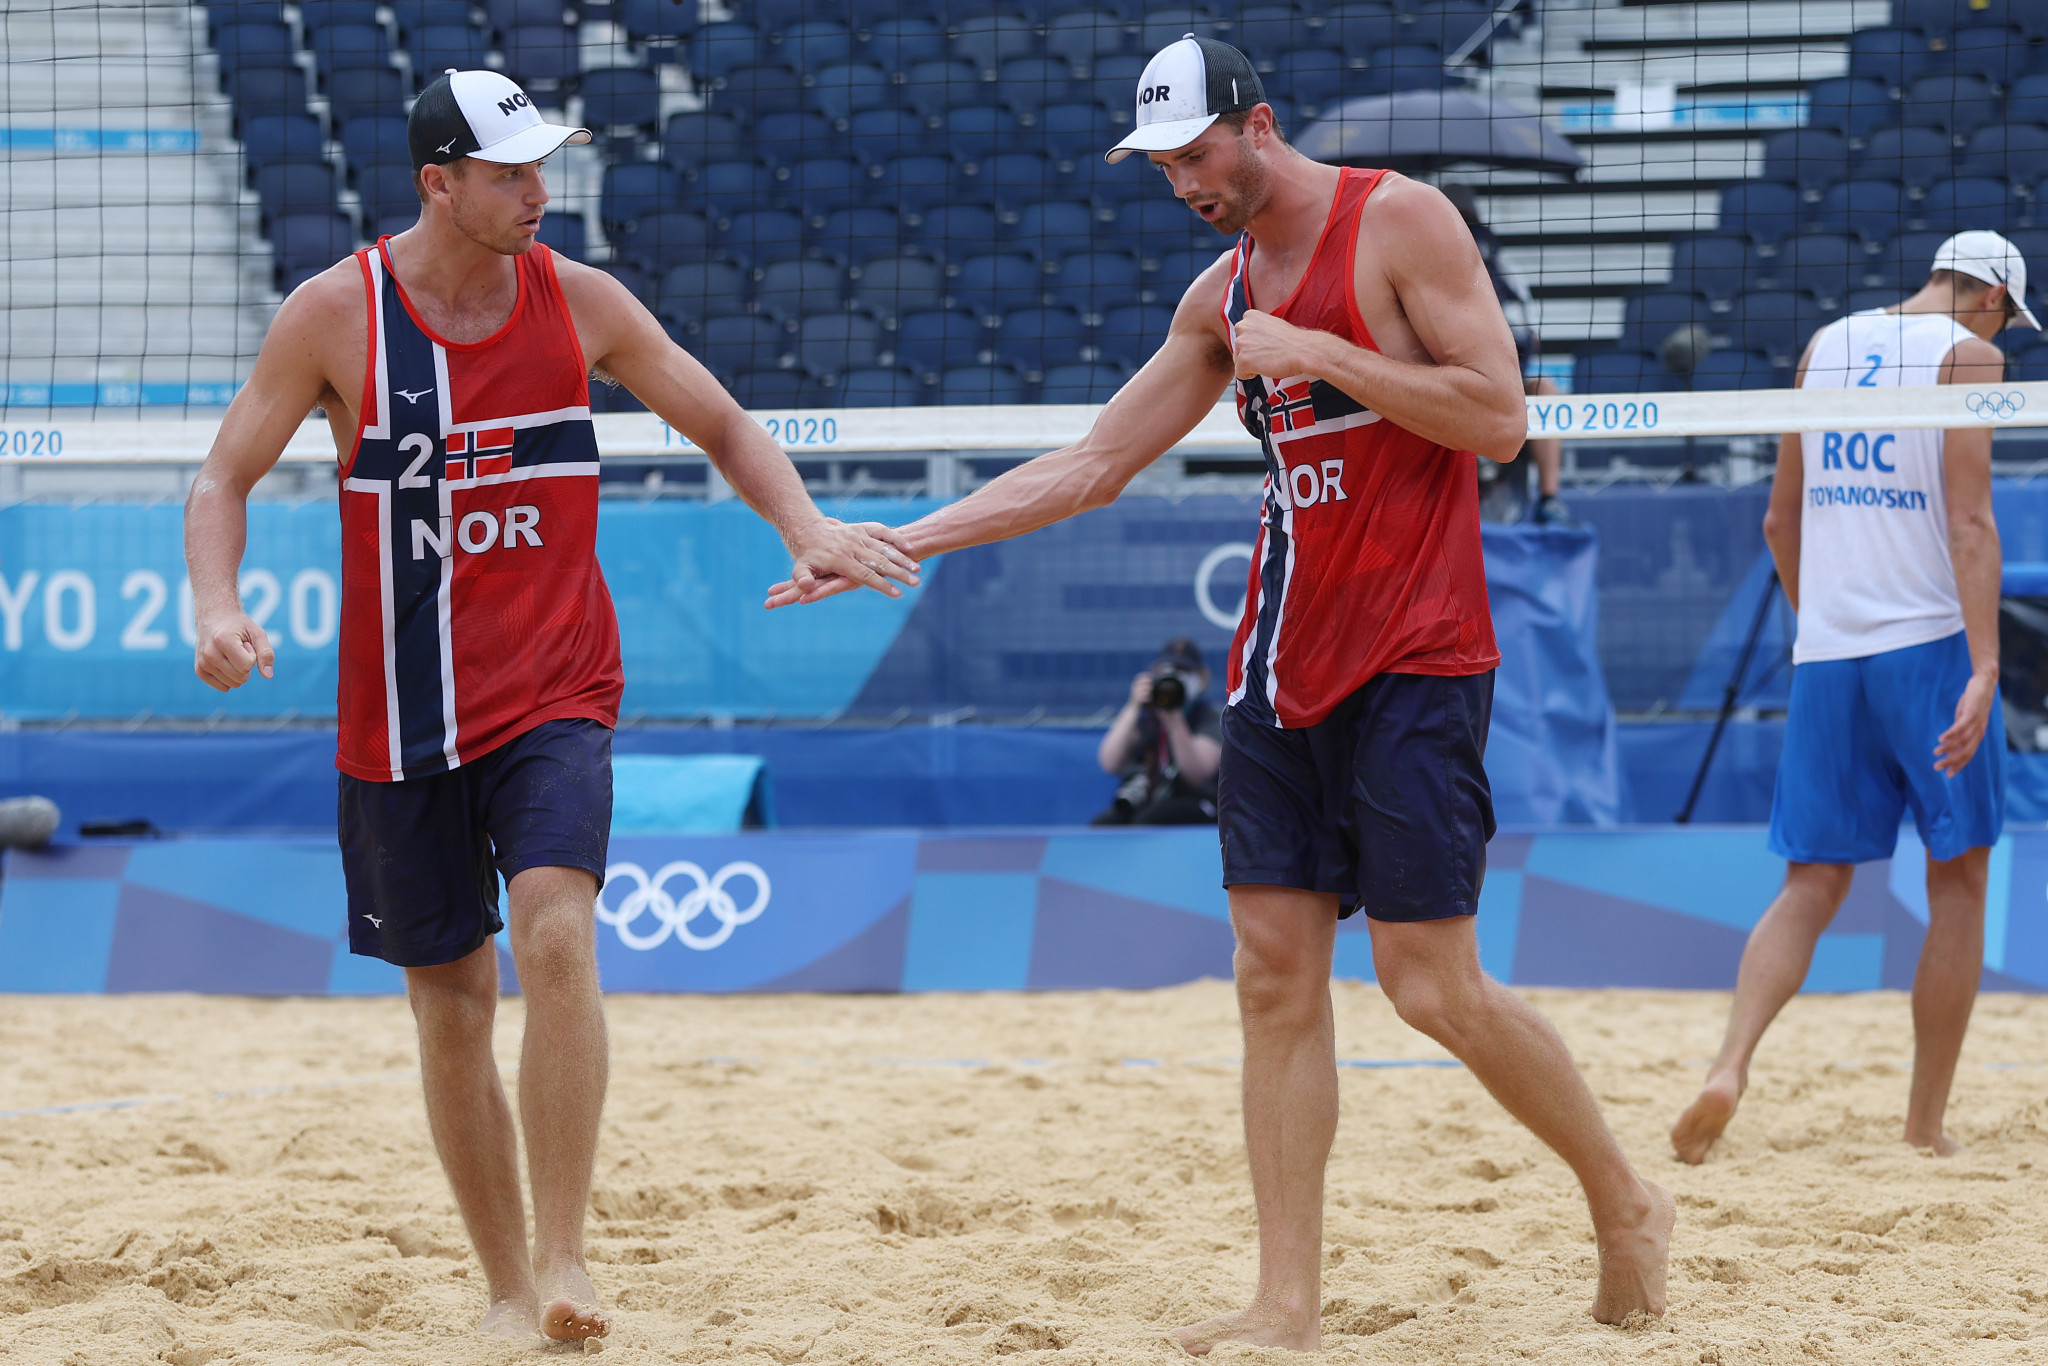 Olympic medallists stay unbeaten at Beach Volleyball World Championships